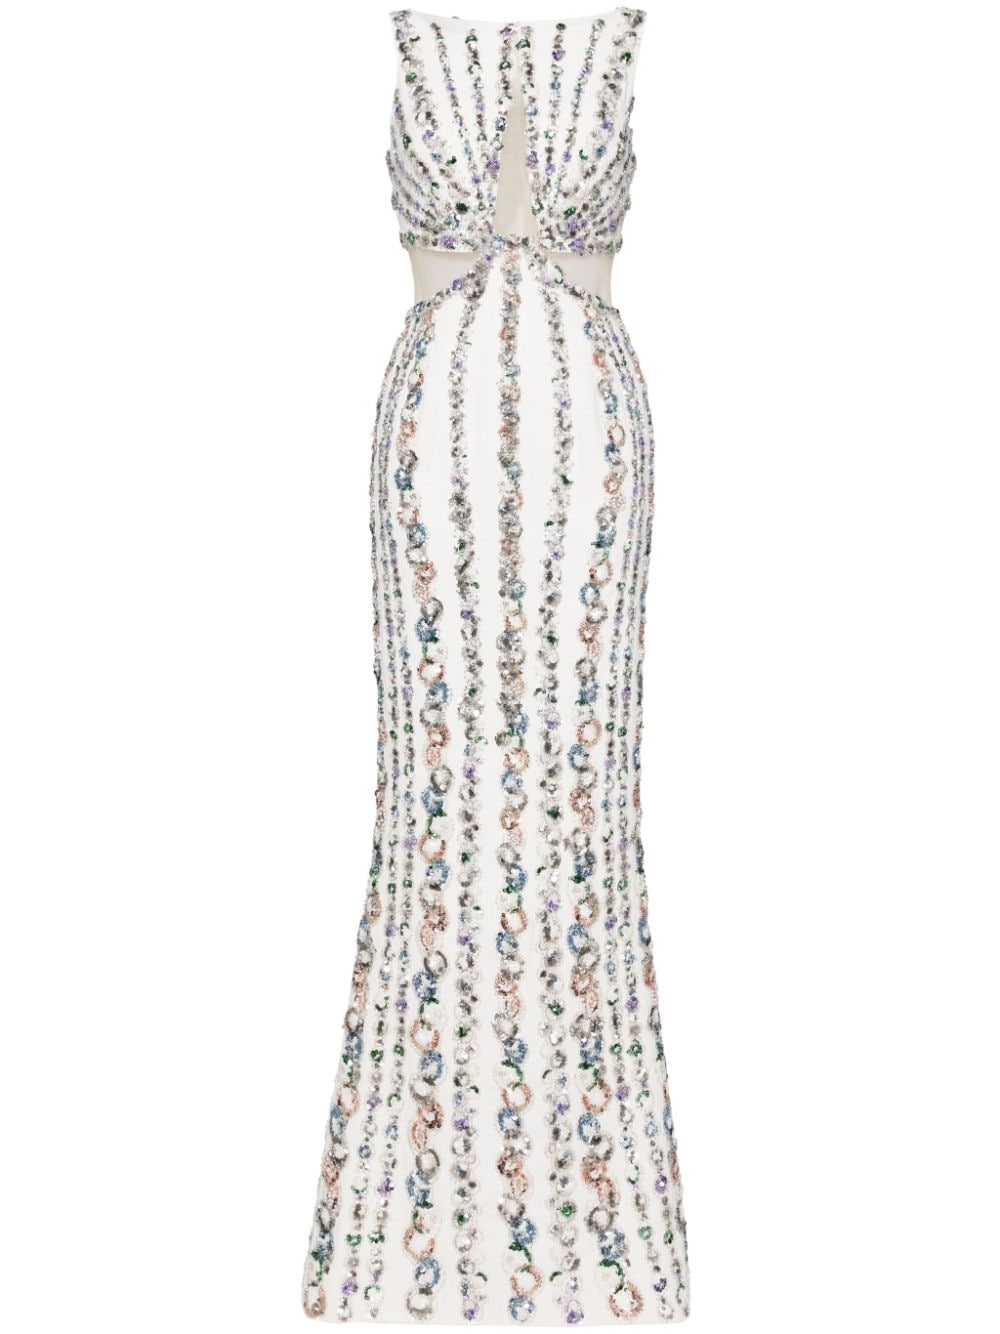 Saiid Kobeisy Beaded Canton-crepe Gown In White